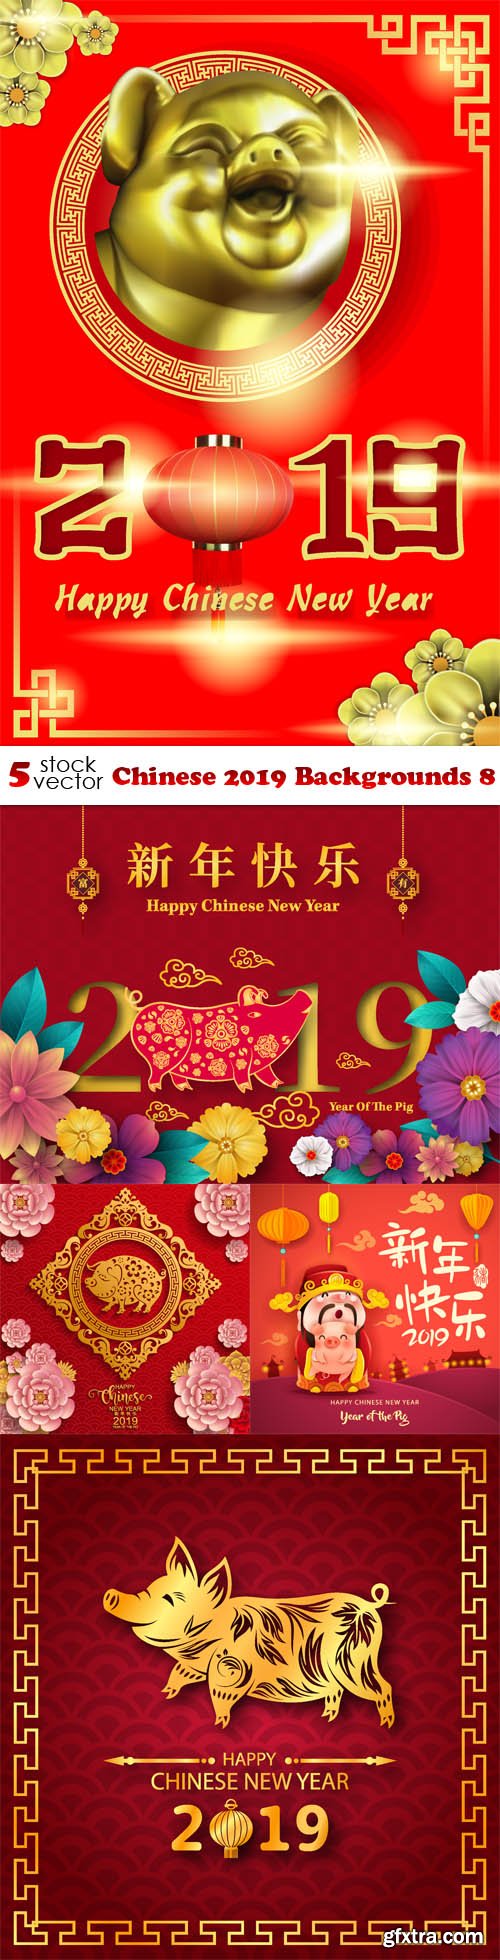 Vectors - Chinese 2019 Backgrounds 8